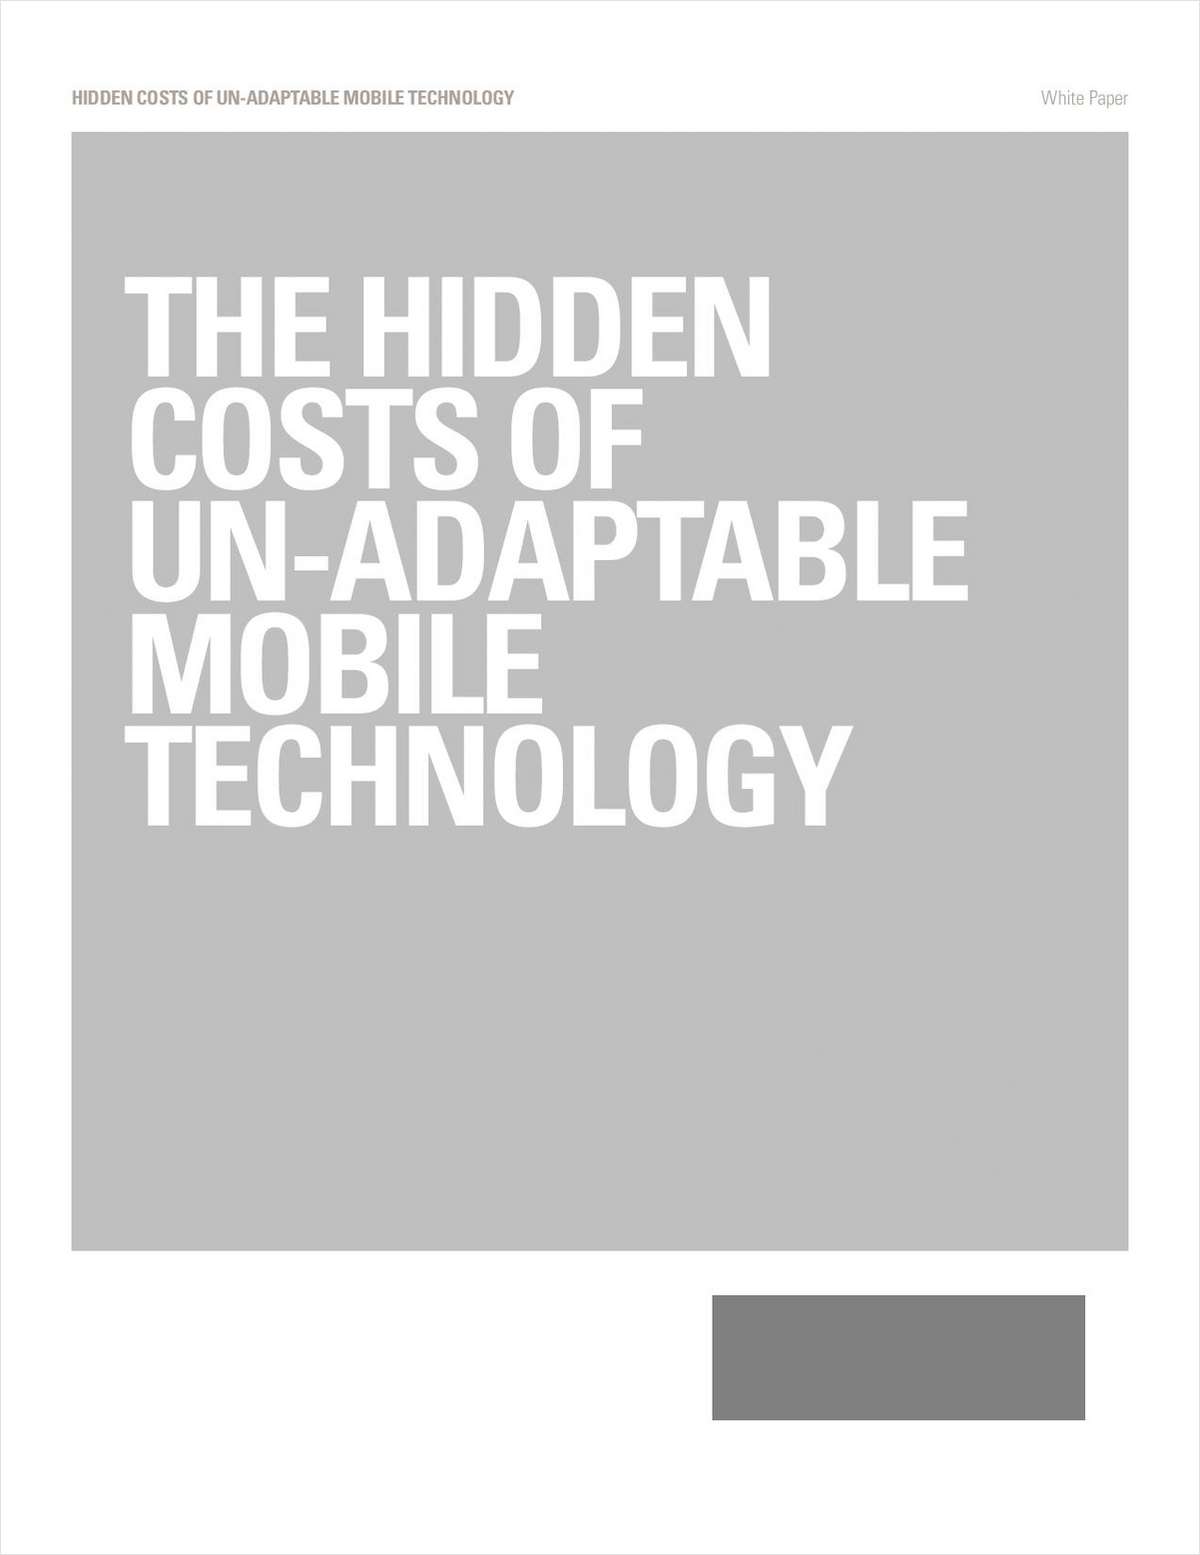 The Hidden Costs of Un-Adaptable Mobile Technology